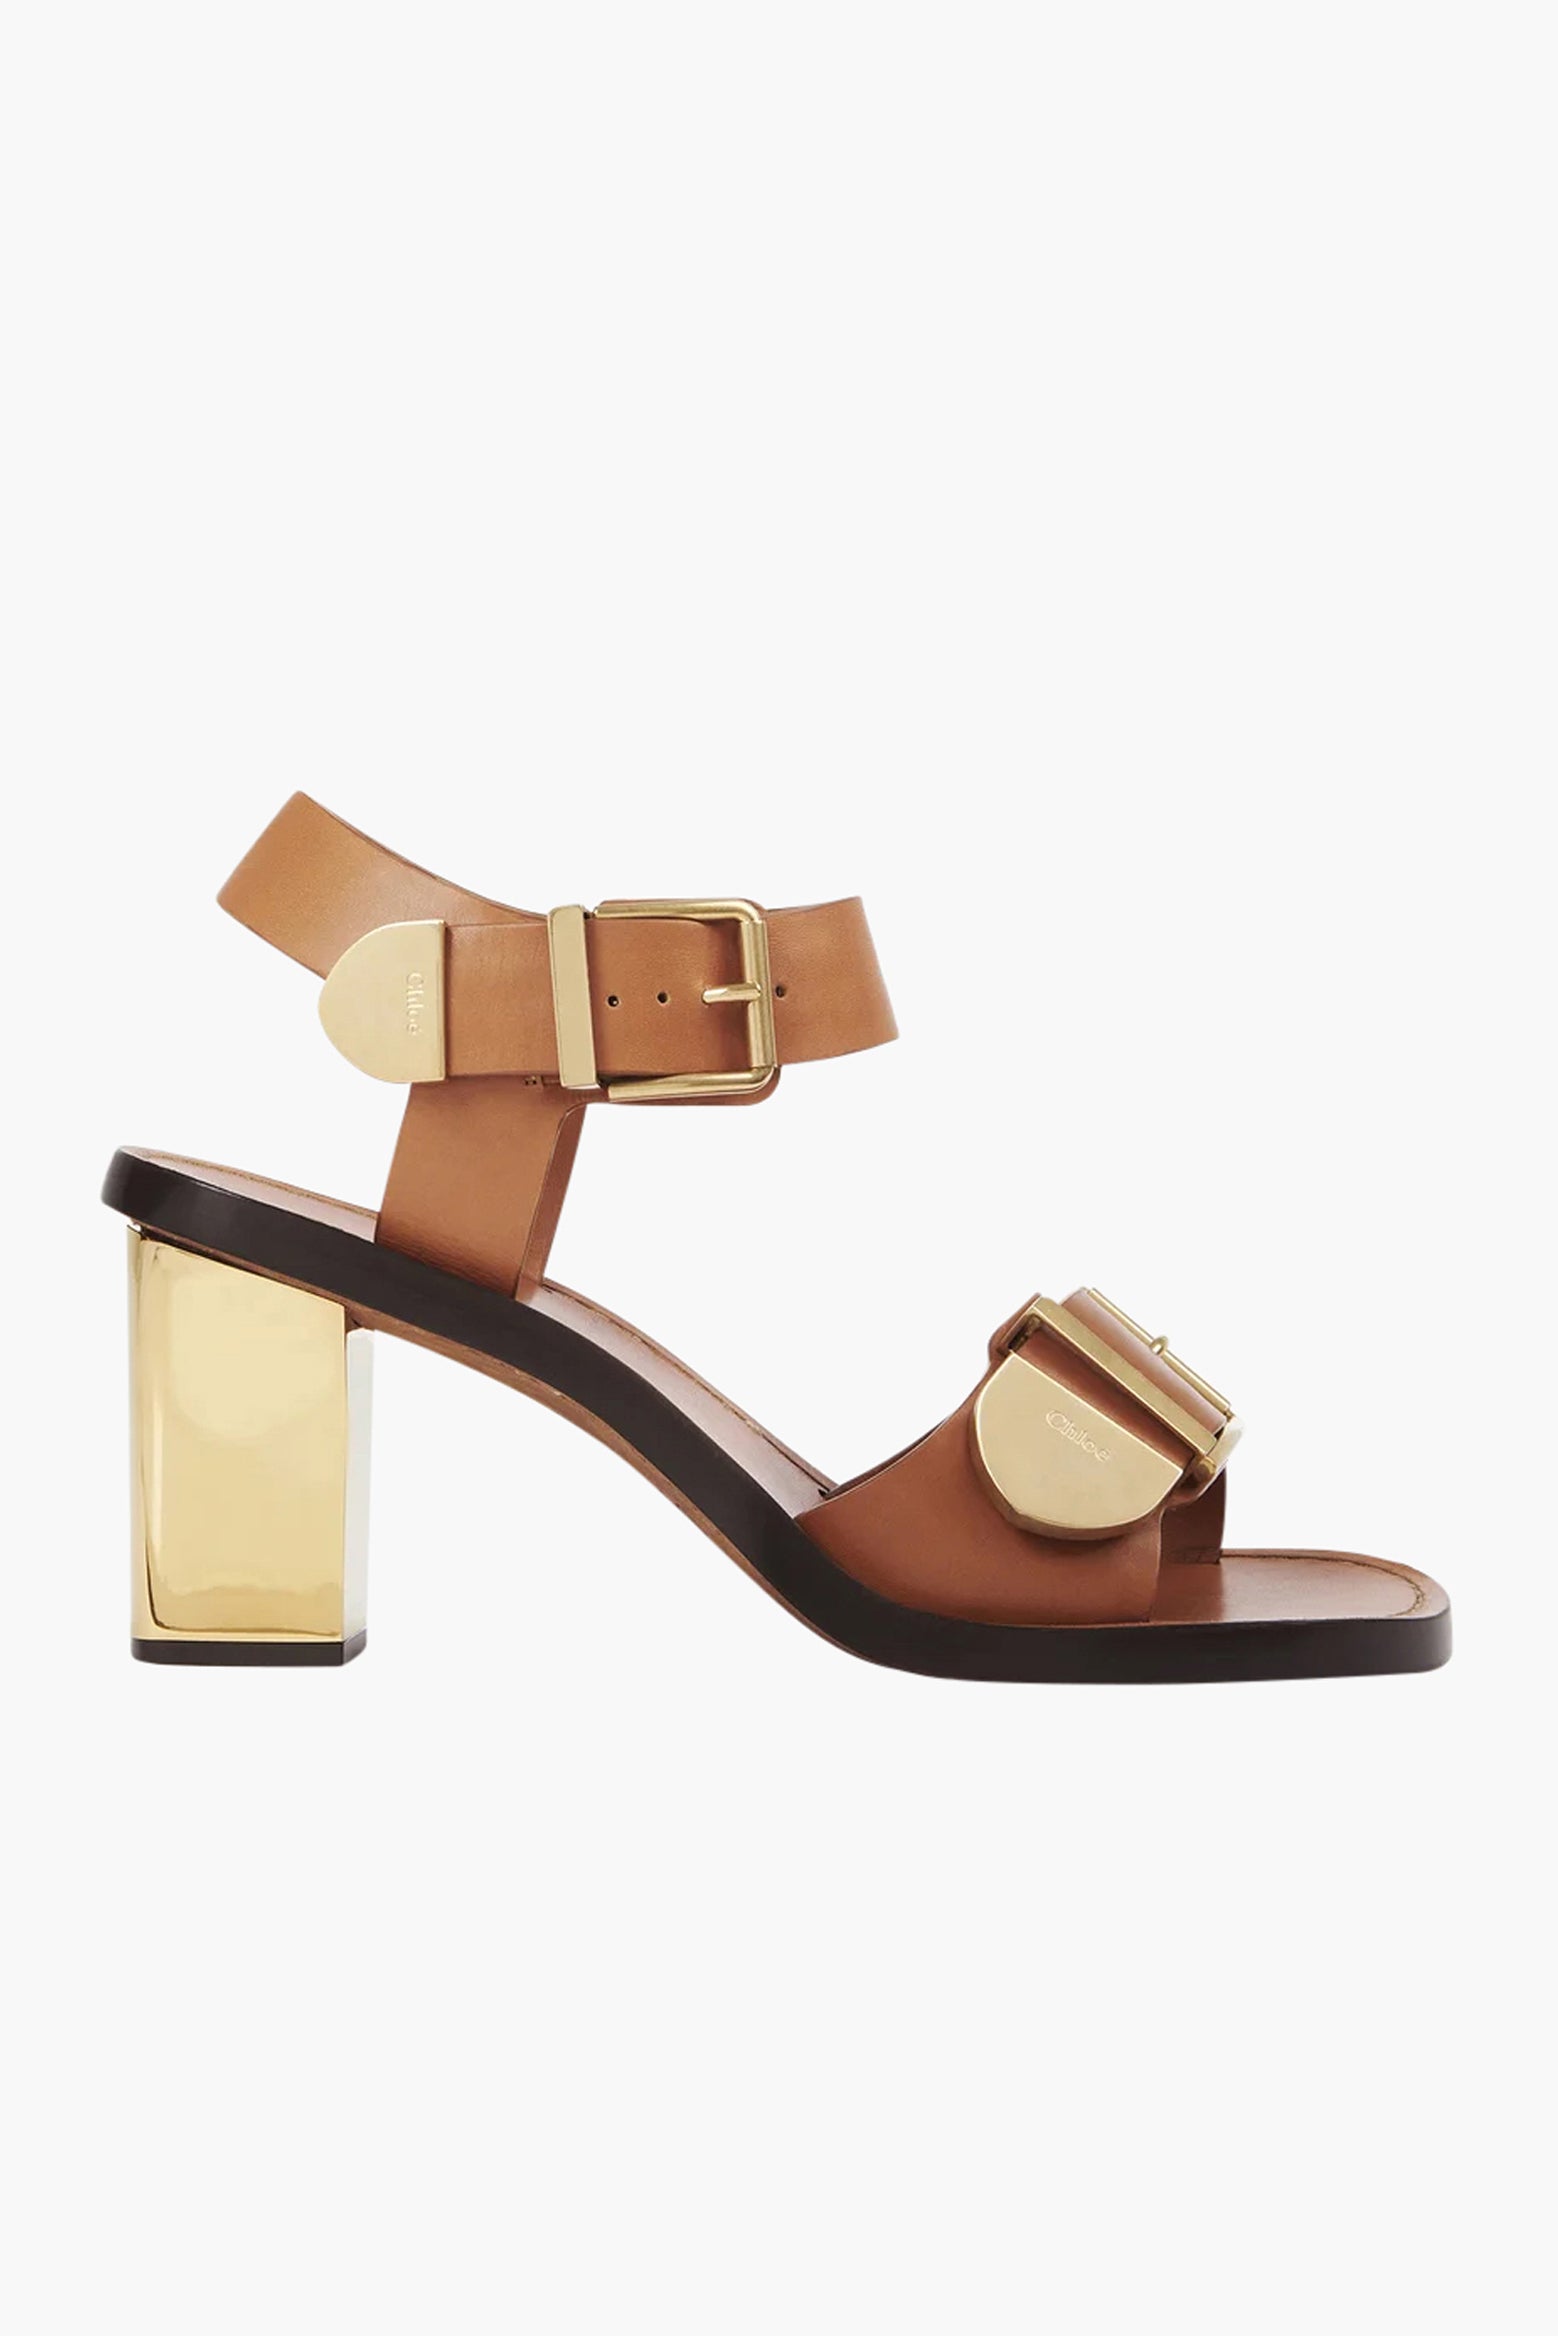 Chloe Rebecca Mule in Luminous Ochre available at The New Trend.